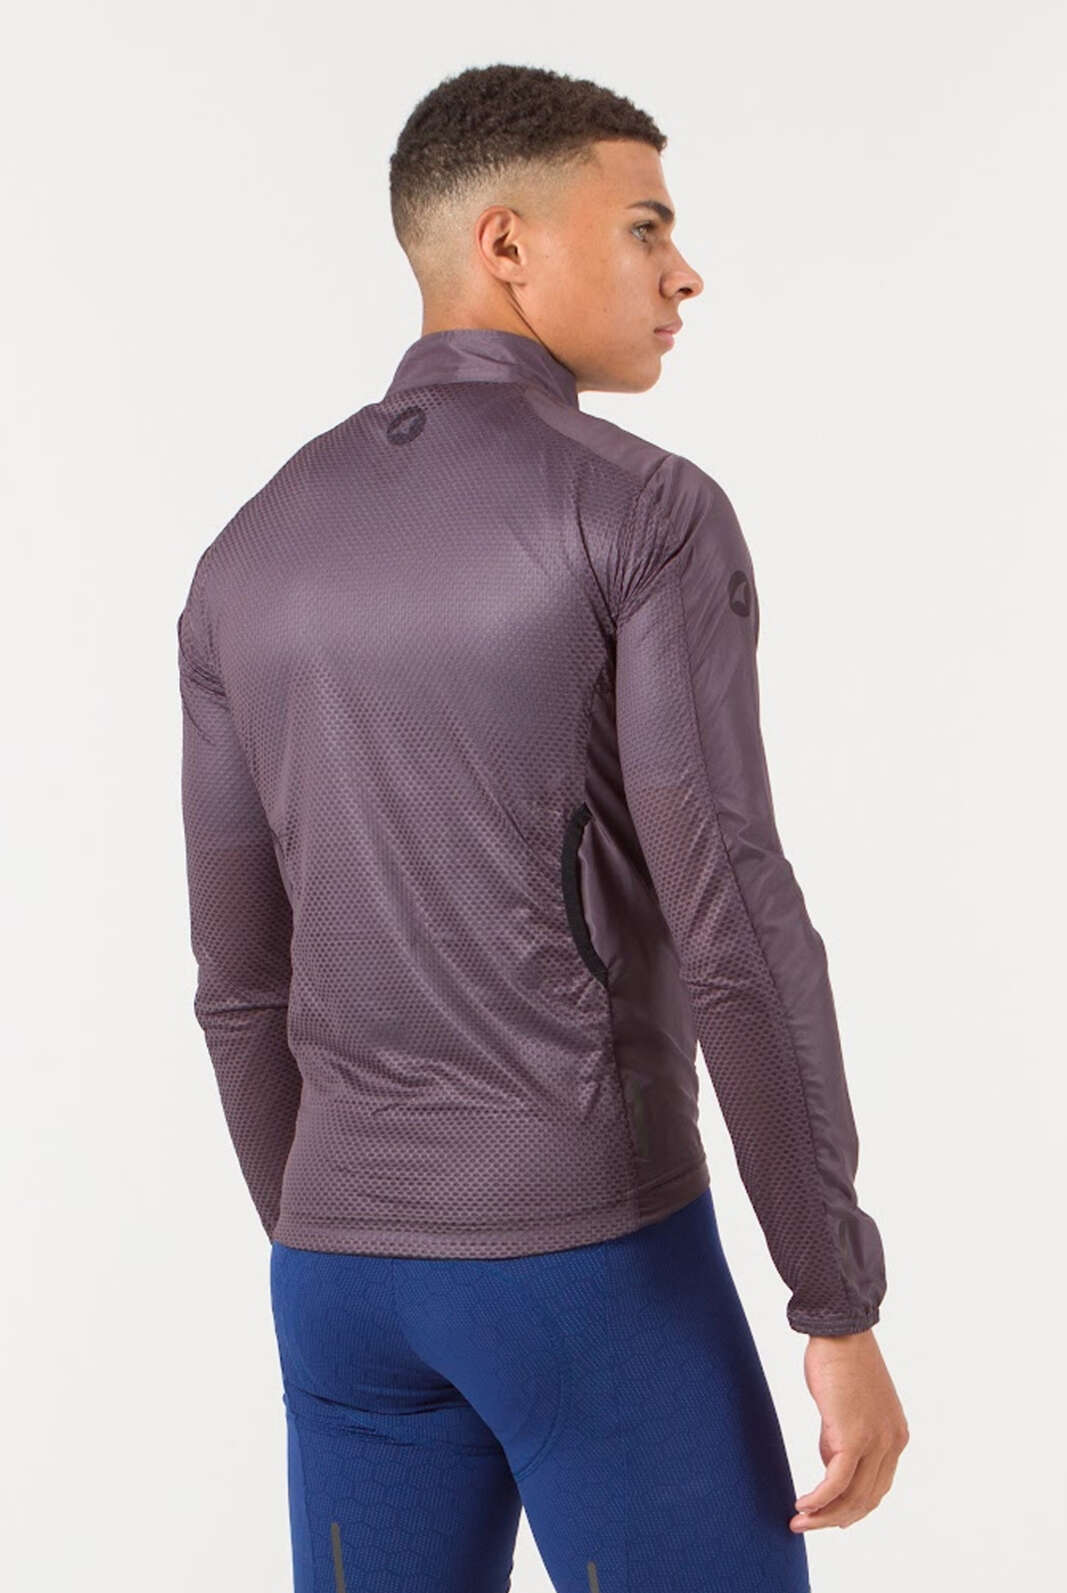 Men's Dark Gray Packable Cycling Jacket - Back View